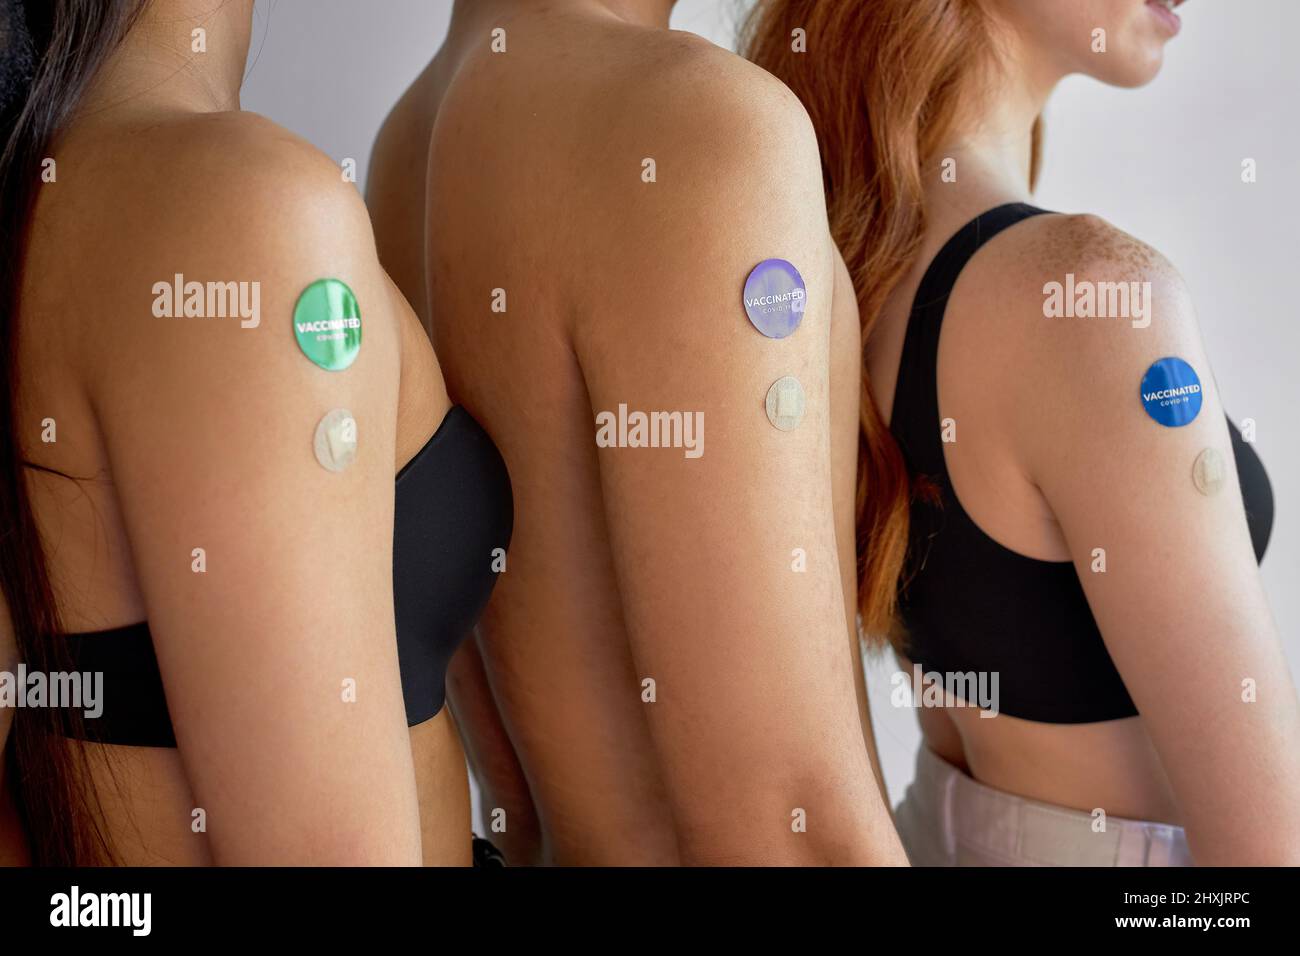 close-up half-naked diverse people showing arm after vaccine injection, standing in row. Coronavirus, Covid-19, omicron, flu vaccination and immunizat Stock Photo